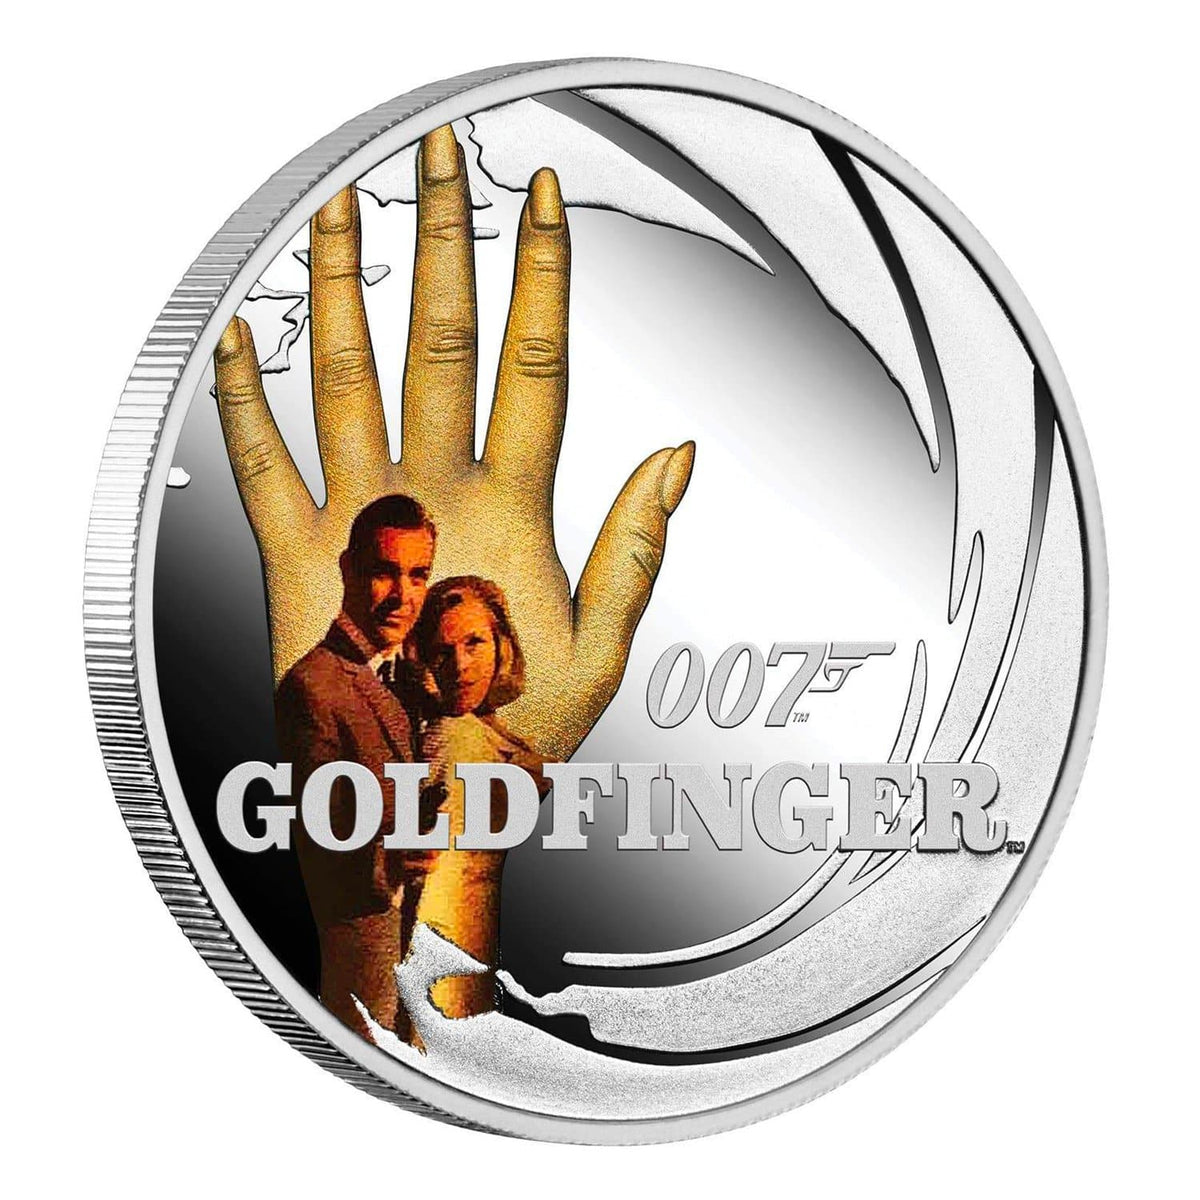 James Bond Goldfinger 1/2 oz Silver Proof Coin - by The Perth Mint SCOIN PERTH MINT 